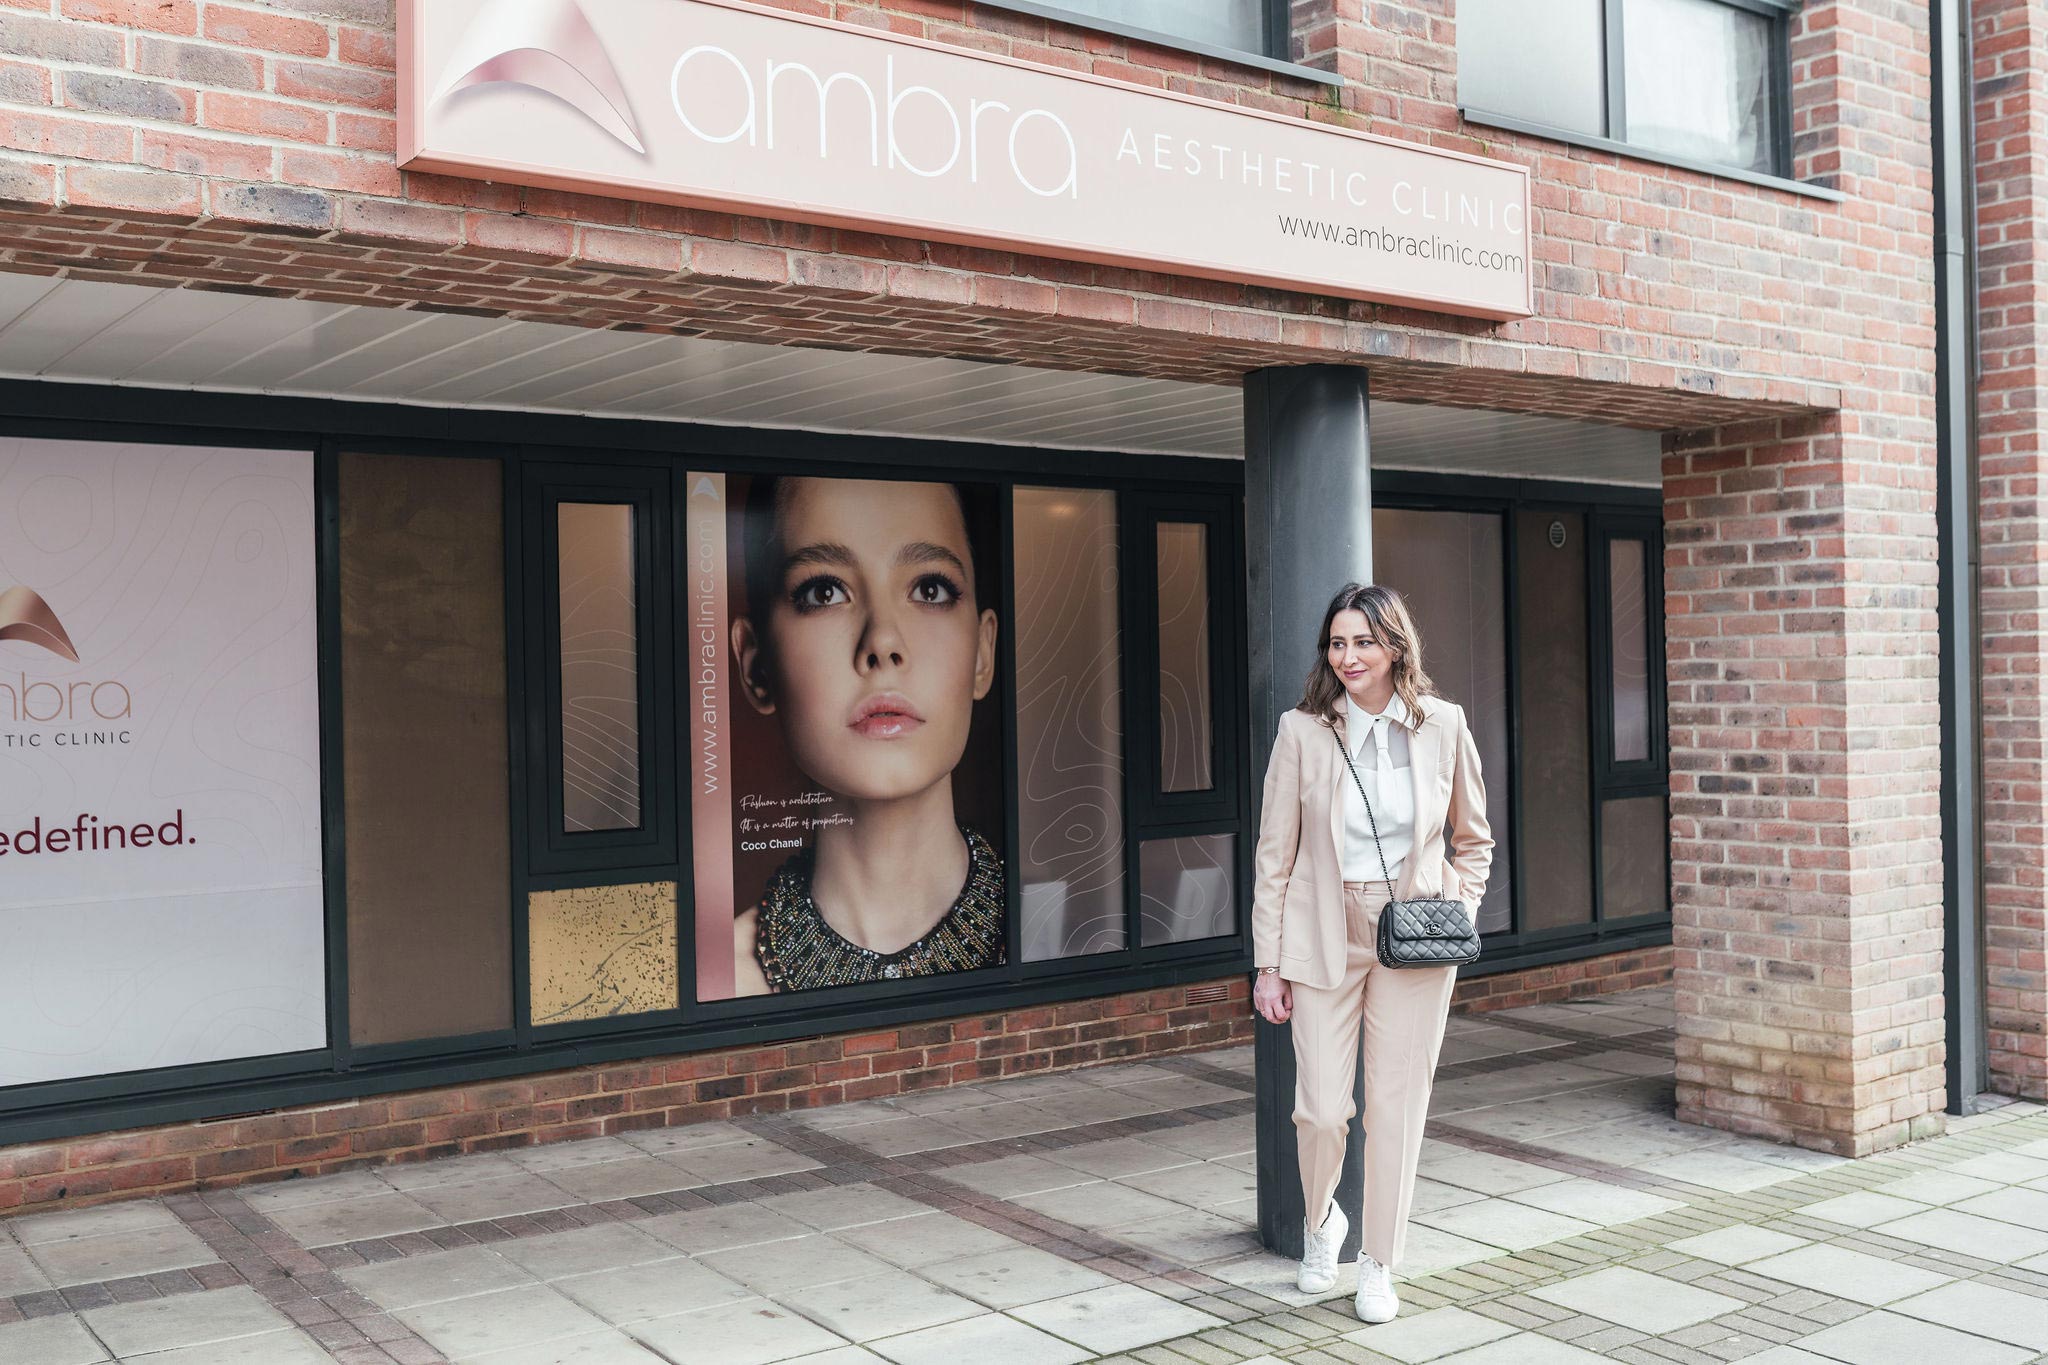 outside ambra aesthetic clinic in finchley